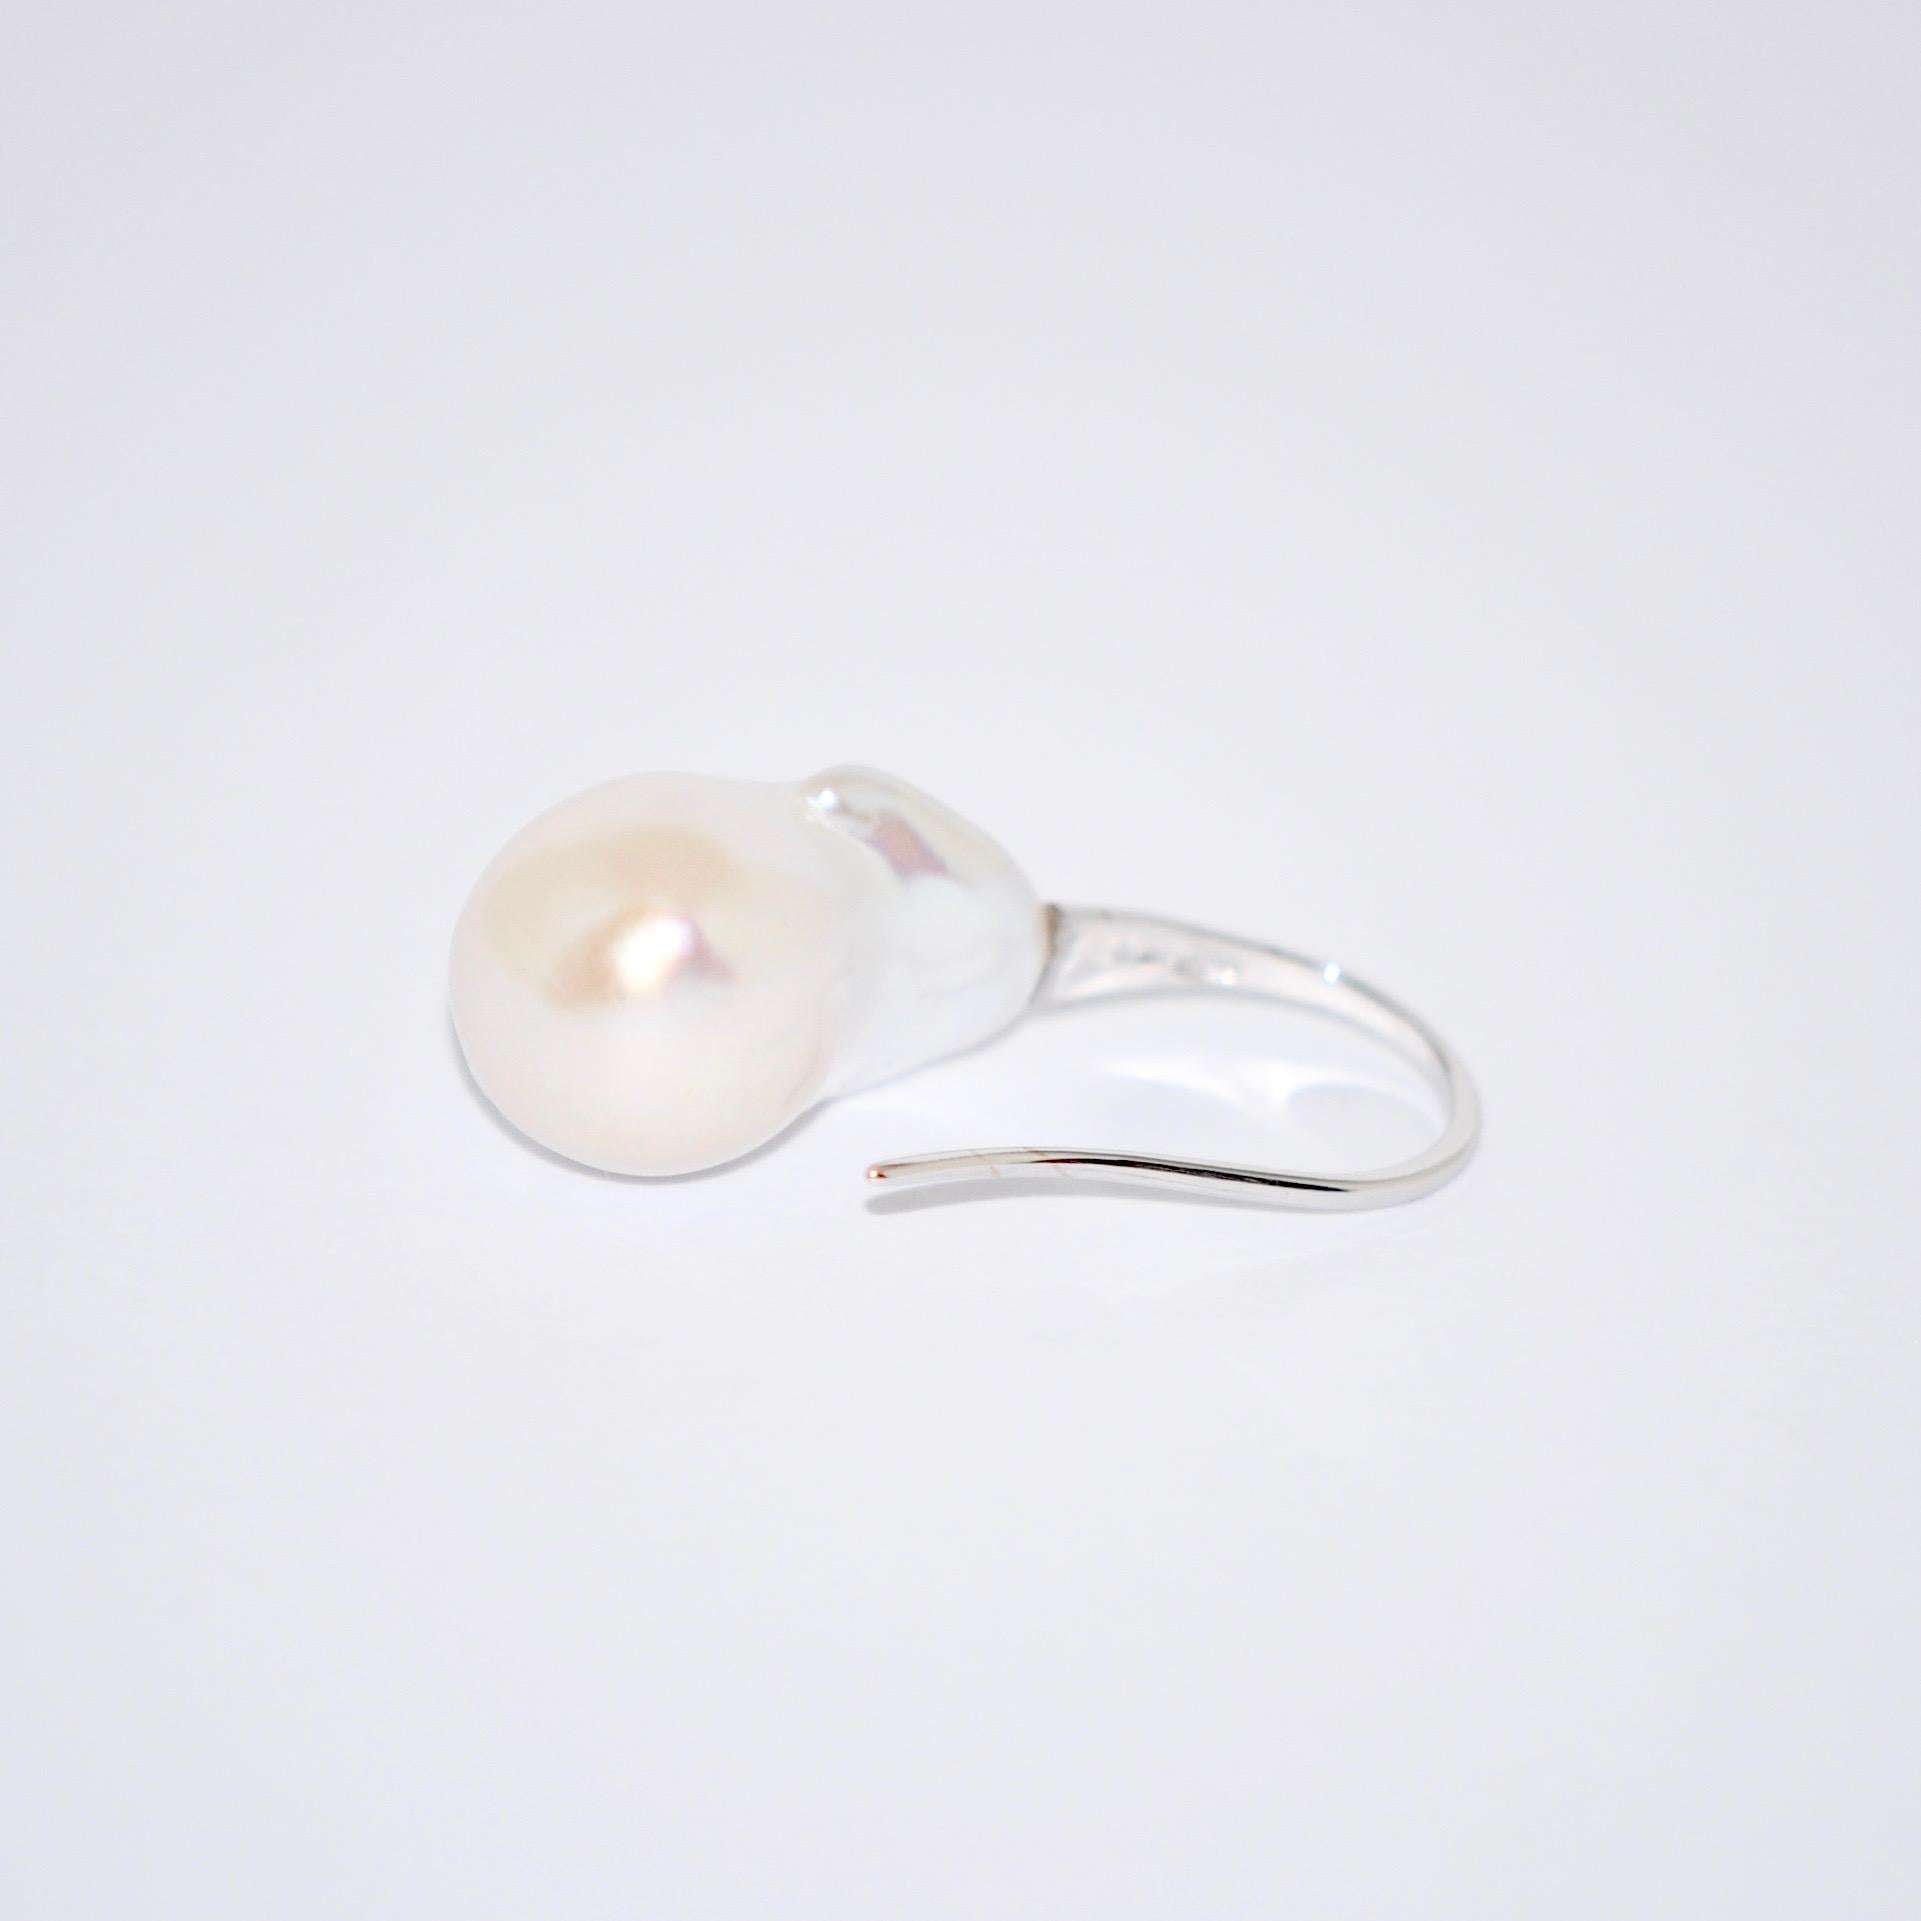 Discover this Baroque Pearls and White Gold Drop Earrings.
Baroque Pearls
White Gold 18 Karat
